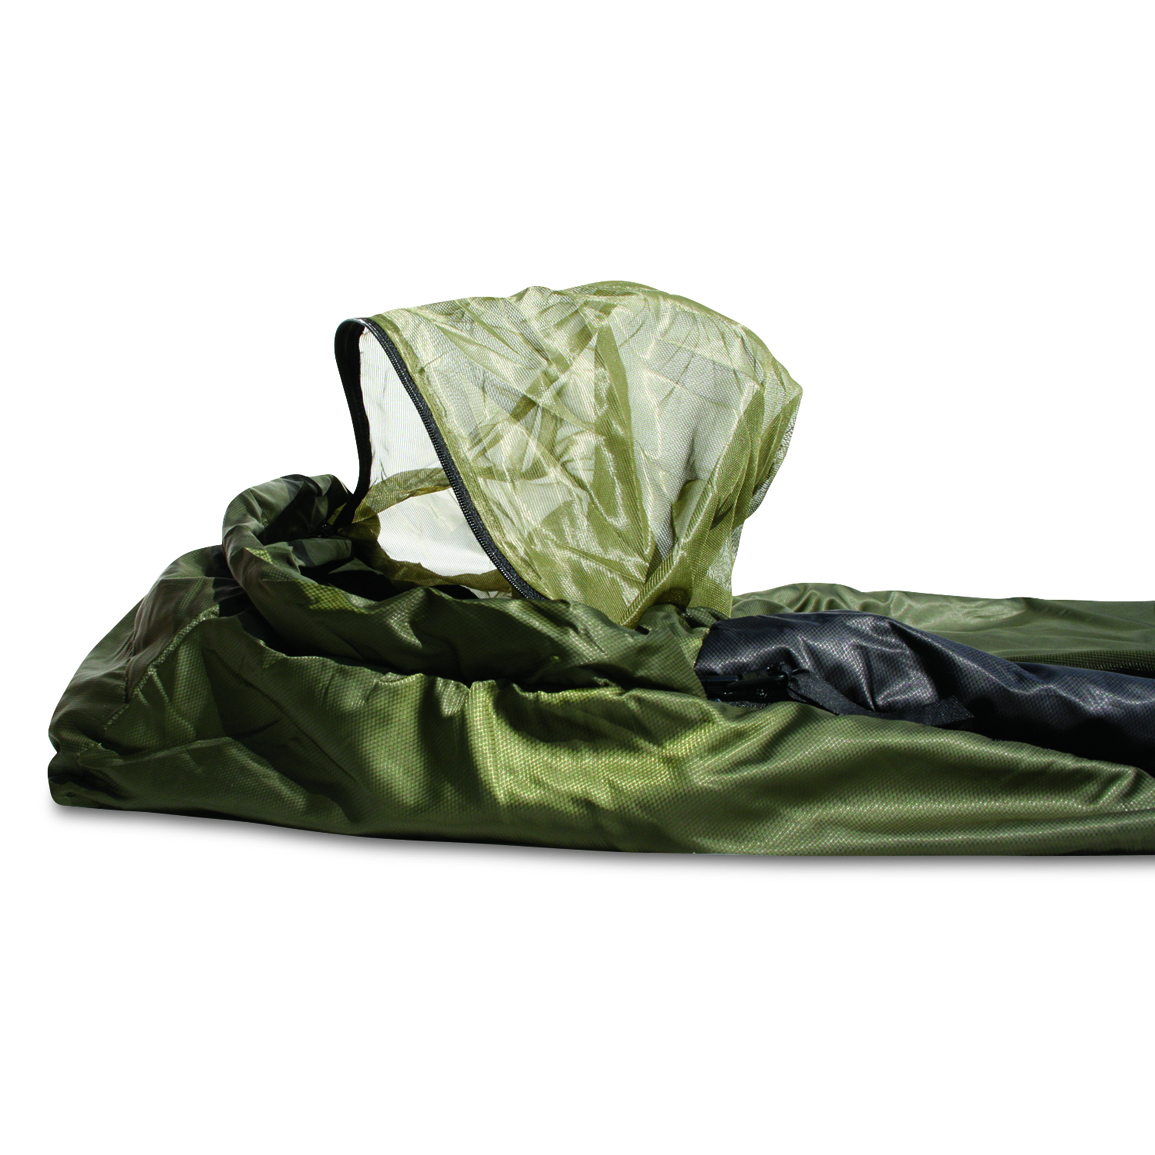 Built-in mosquito netting, Olive